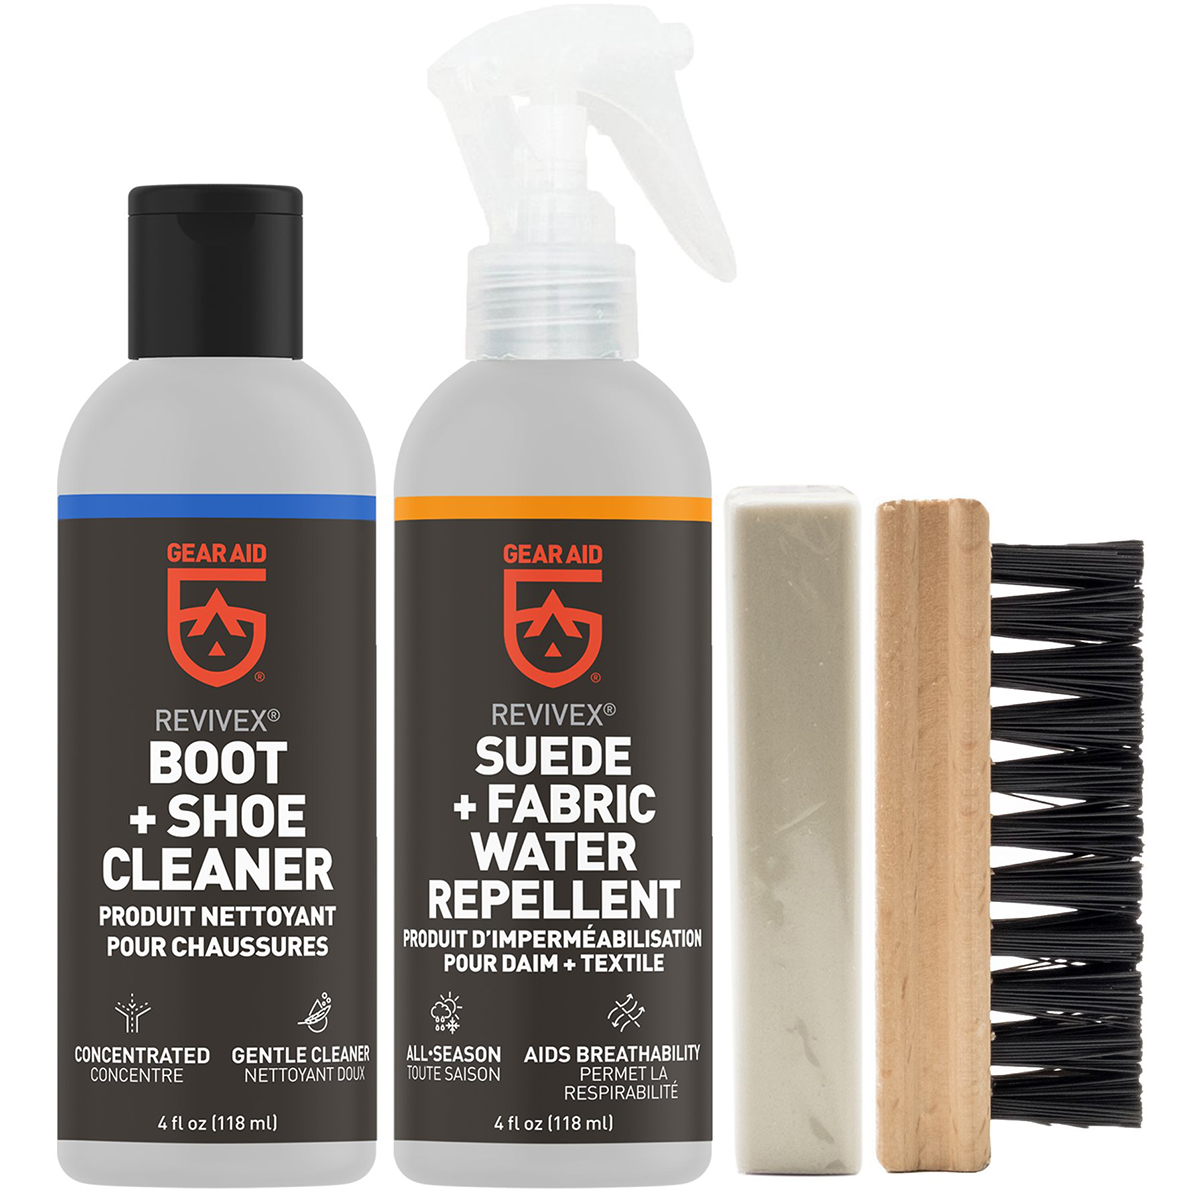 GEAR AID Revivex Suede + Fabric Boot Care Kit - image 1 of 3